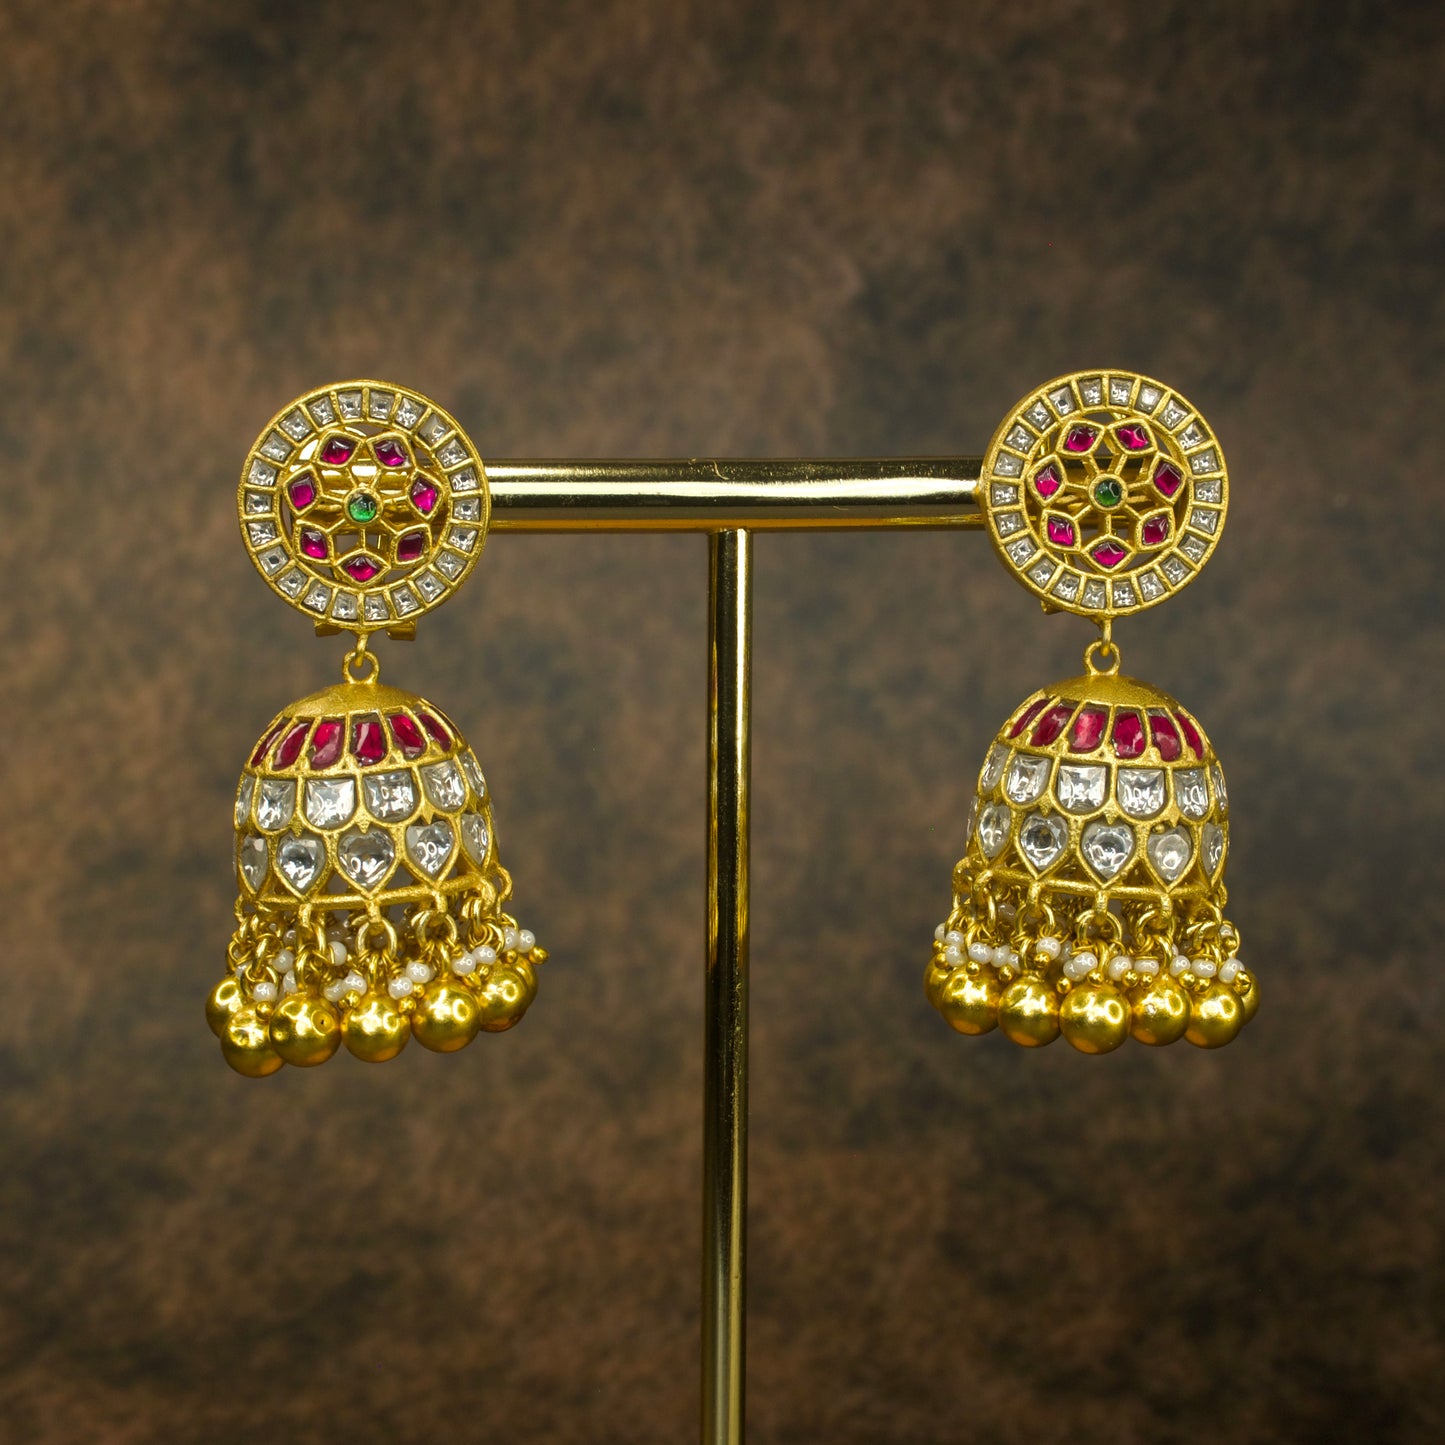 Jadau Kundan jhumkas with vibrant red and green gemstones, white Kundan stones, pearl drops, and gold beads, set in pure gold plating.